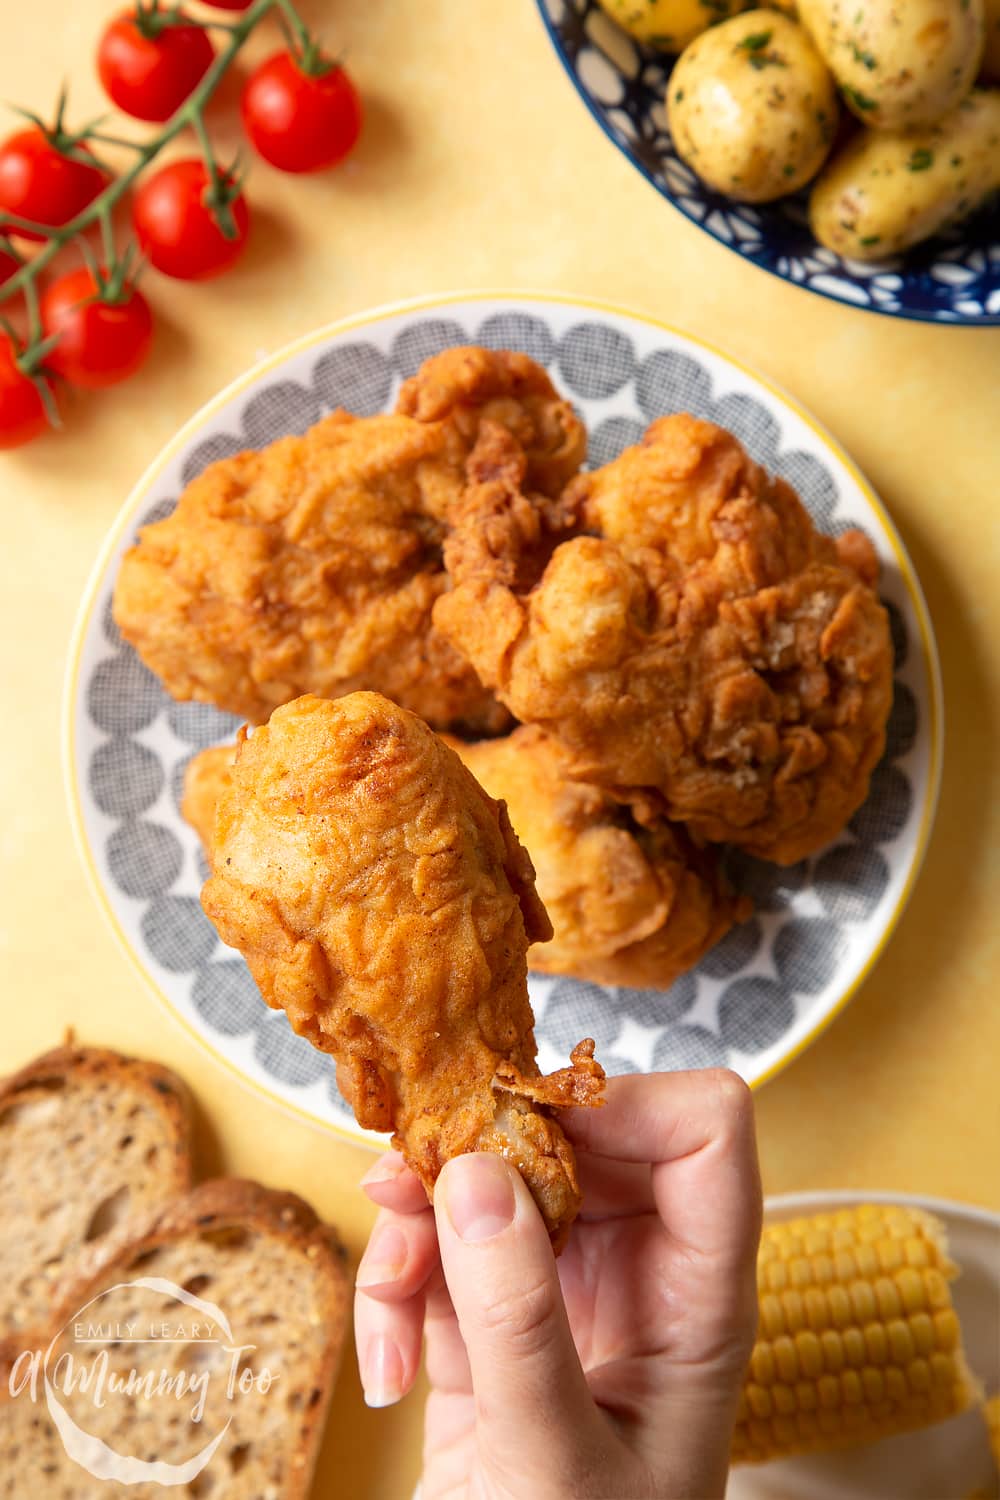 Gordon Ramsay’s buttermilk fried chicken arranged on a plate, surrounded by tomatoes, potatoes, bread and corn on the cob. A hand holds a well-coated drumstick, with a golden seasoned coating.